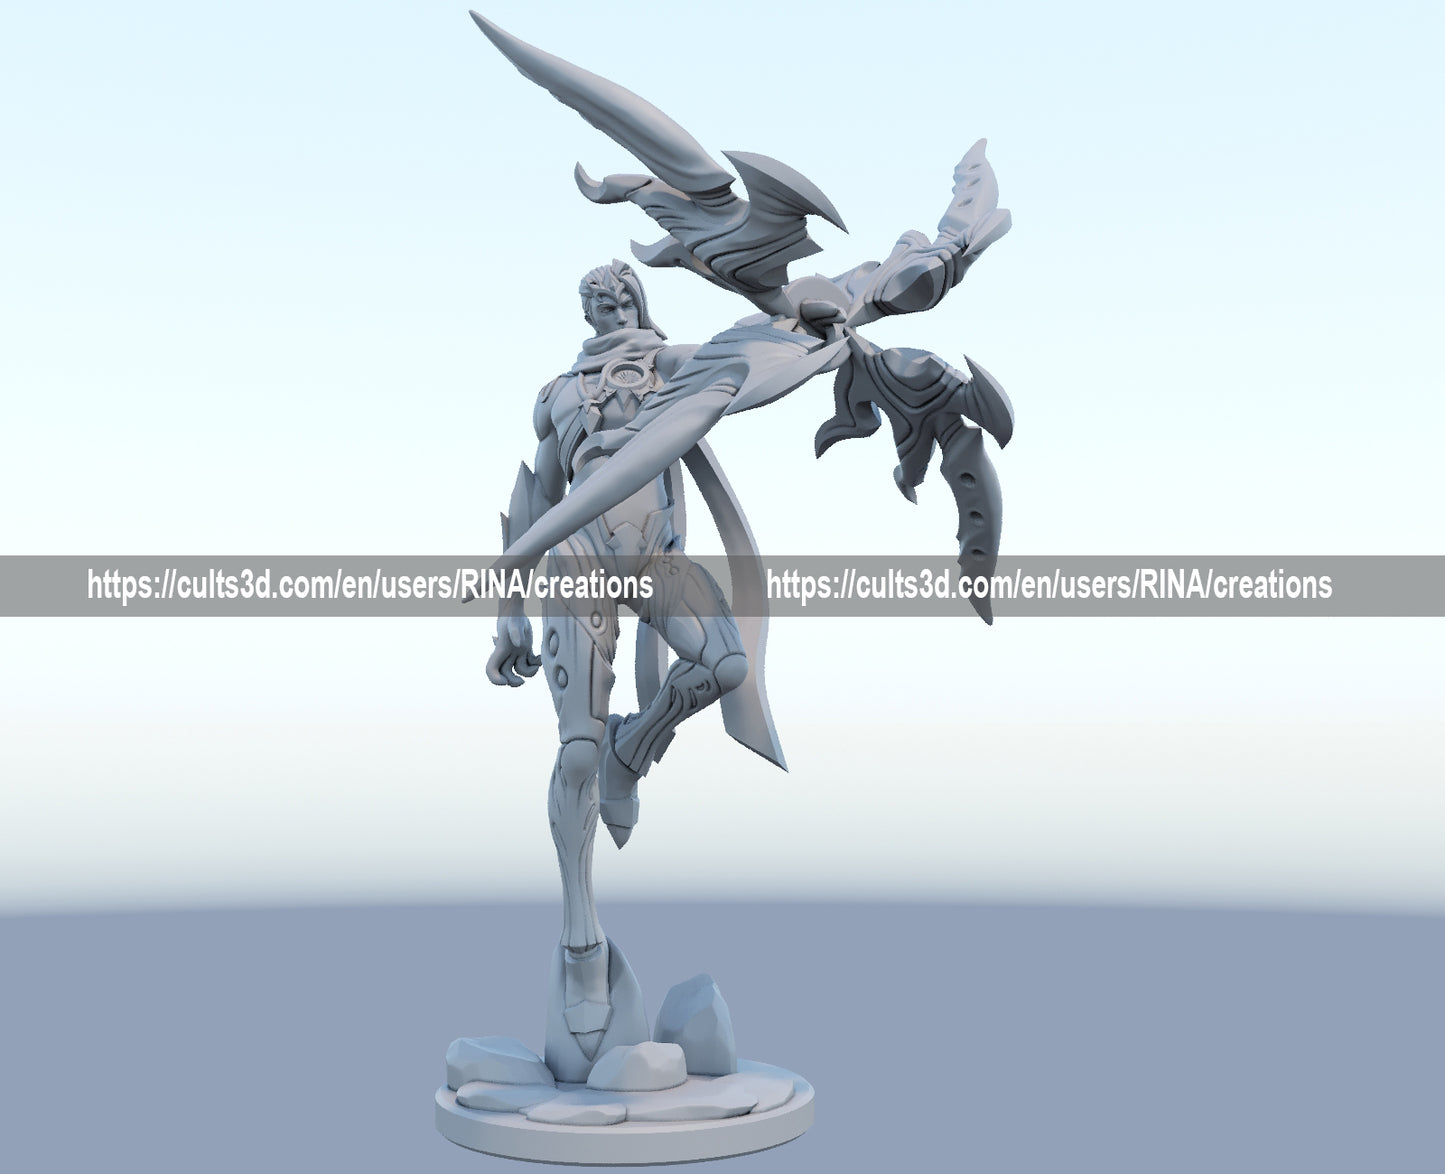 Varus 3D-printed League of Legends champion figure. Decorate your gaming setup or home with your favorite League of Legends champion! Choose between the unpainted version, perfect for you to paint yourself, or the hand-painted version by a professional painter. Order your figure today!